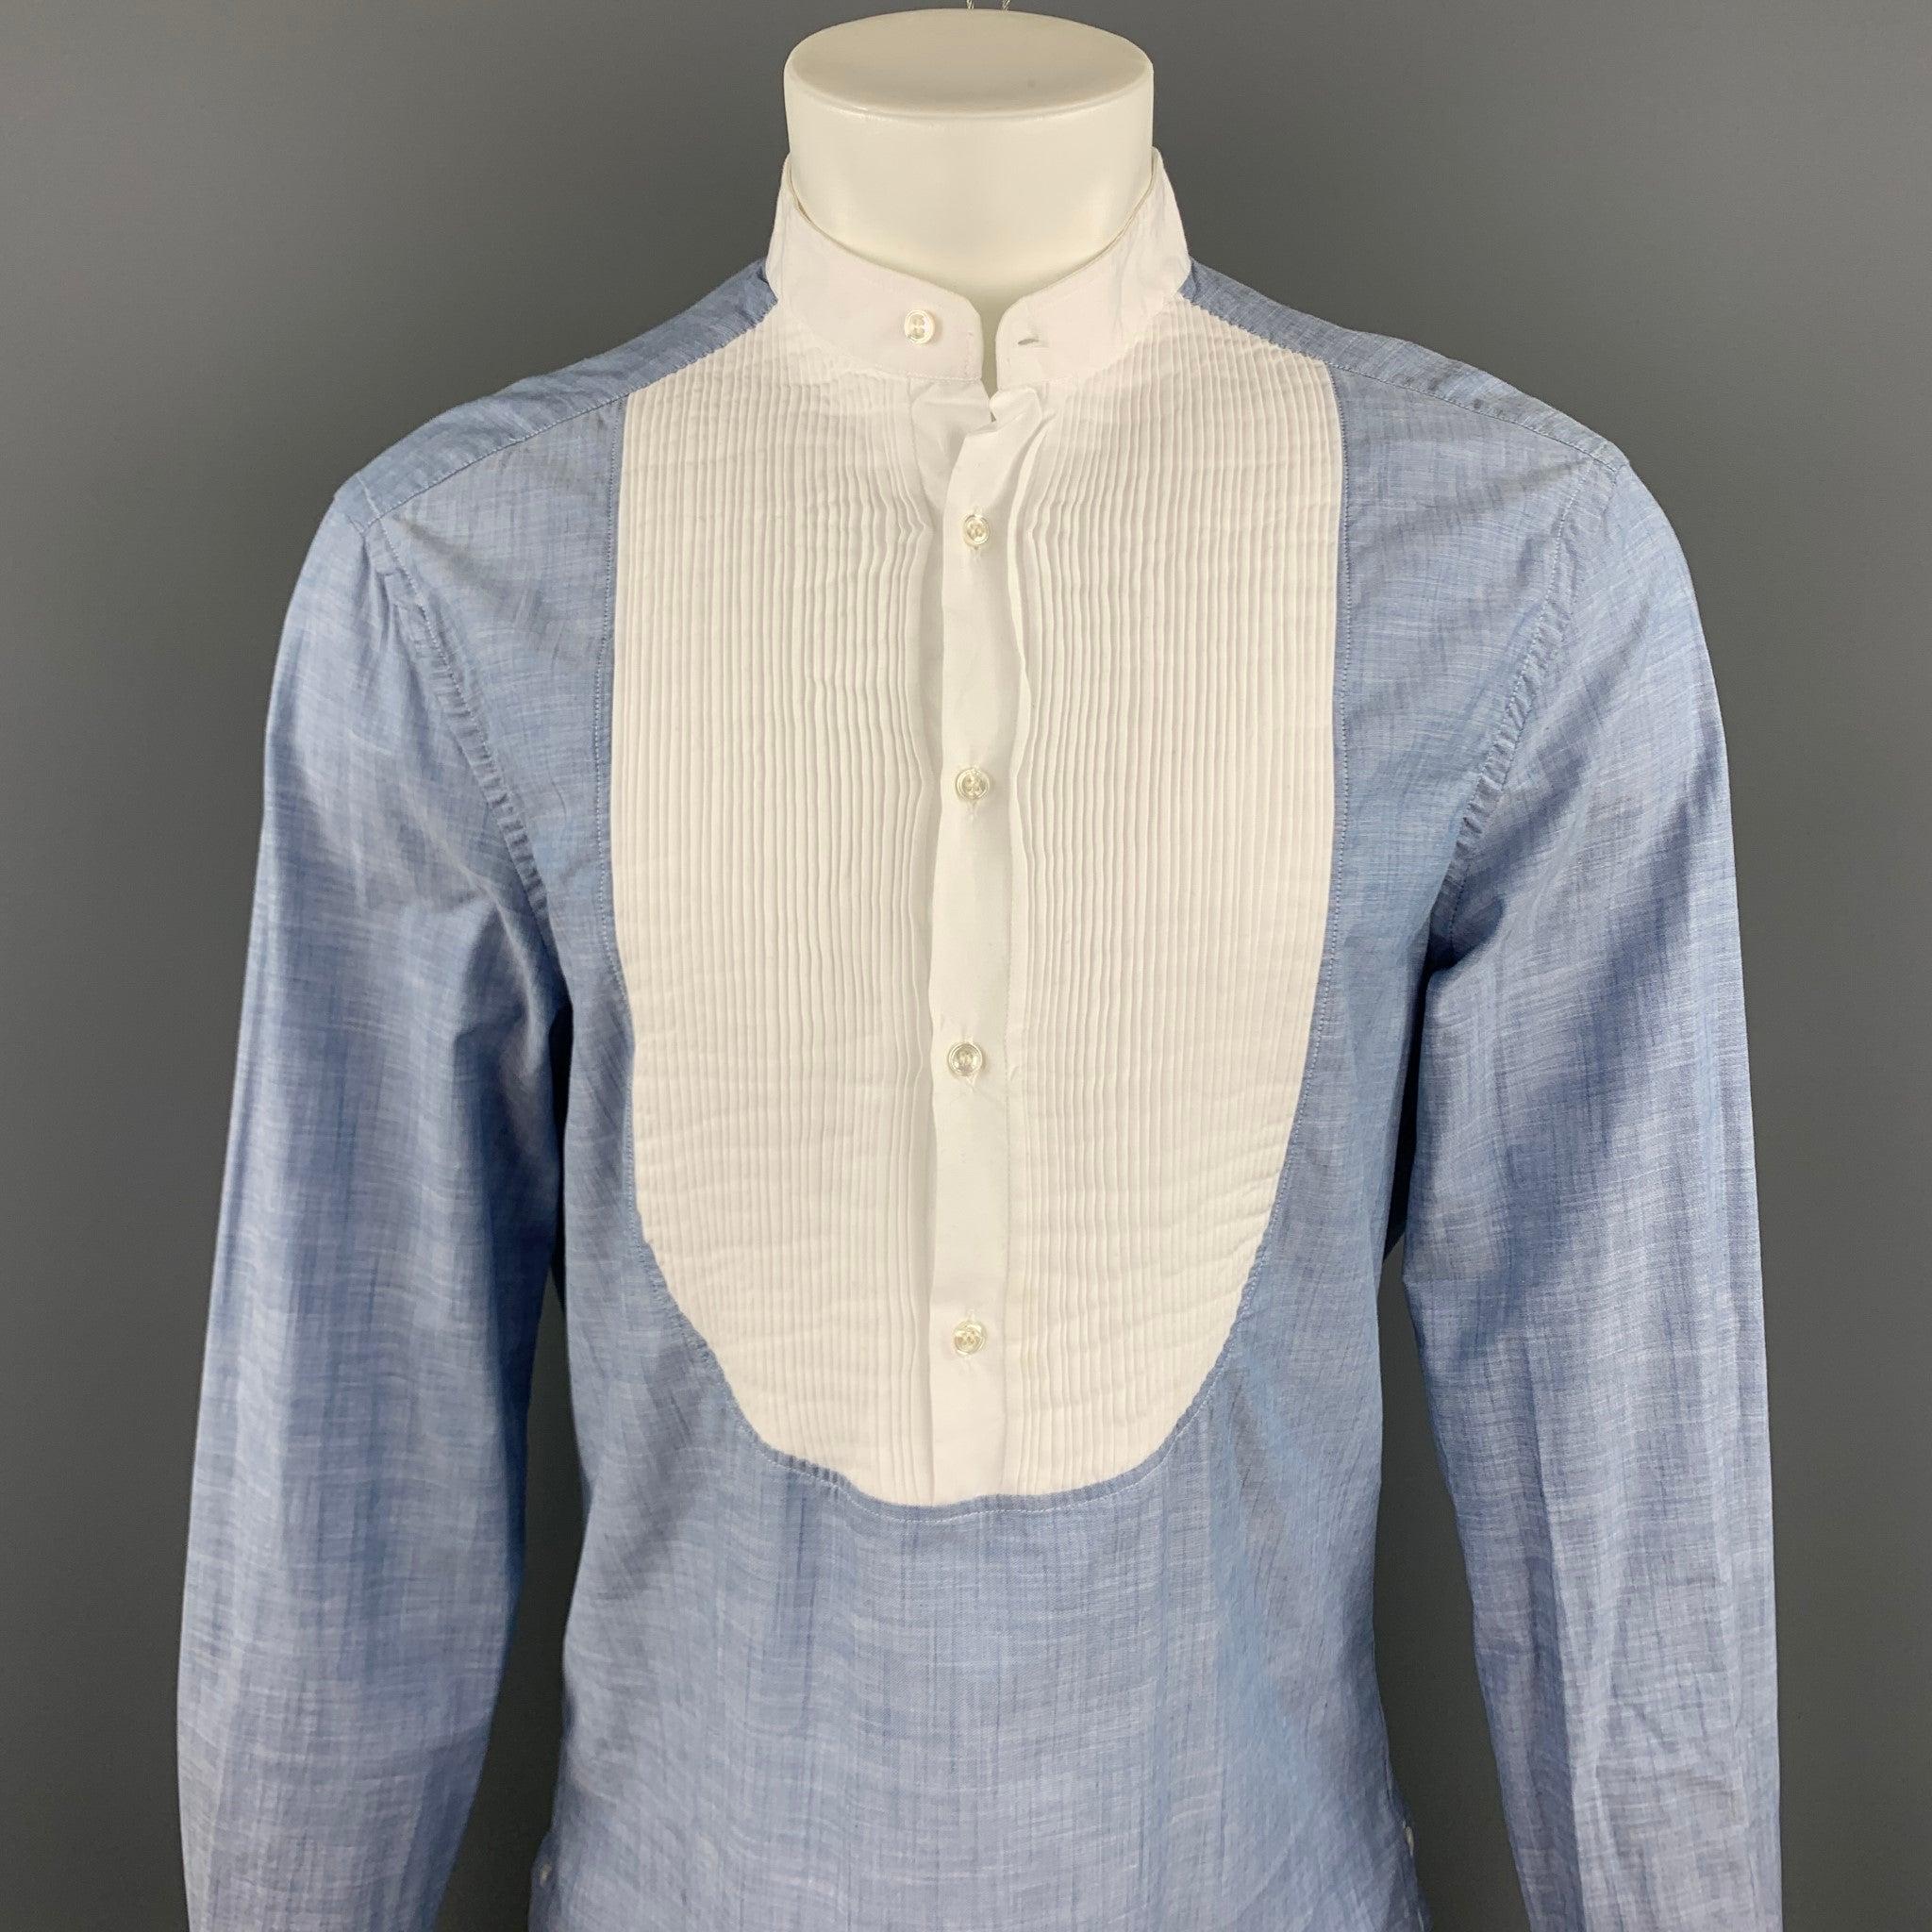 MICHAEL BASTIAN long sleeve shirt comes in a blue cotton with a white pleated panel chest detail featuring a nehru collar and a half button closure. Made in Italy.Very Good
Pre-Owned Condition. 

Marked:   16.5/42 

Measurements: 
 
Shoulder: 19